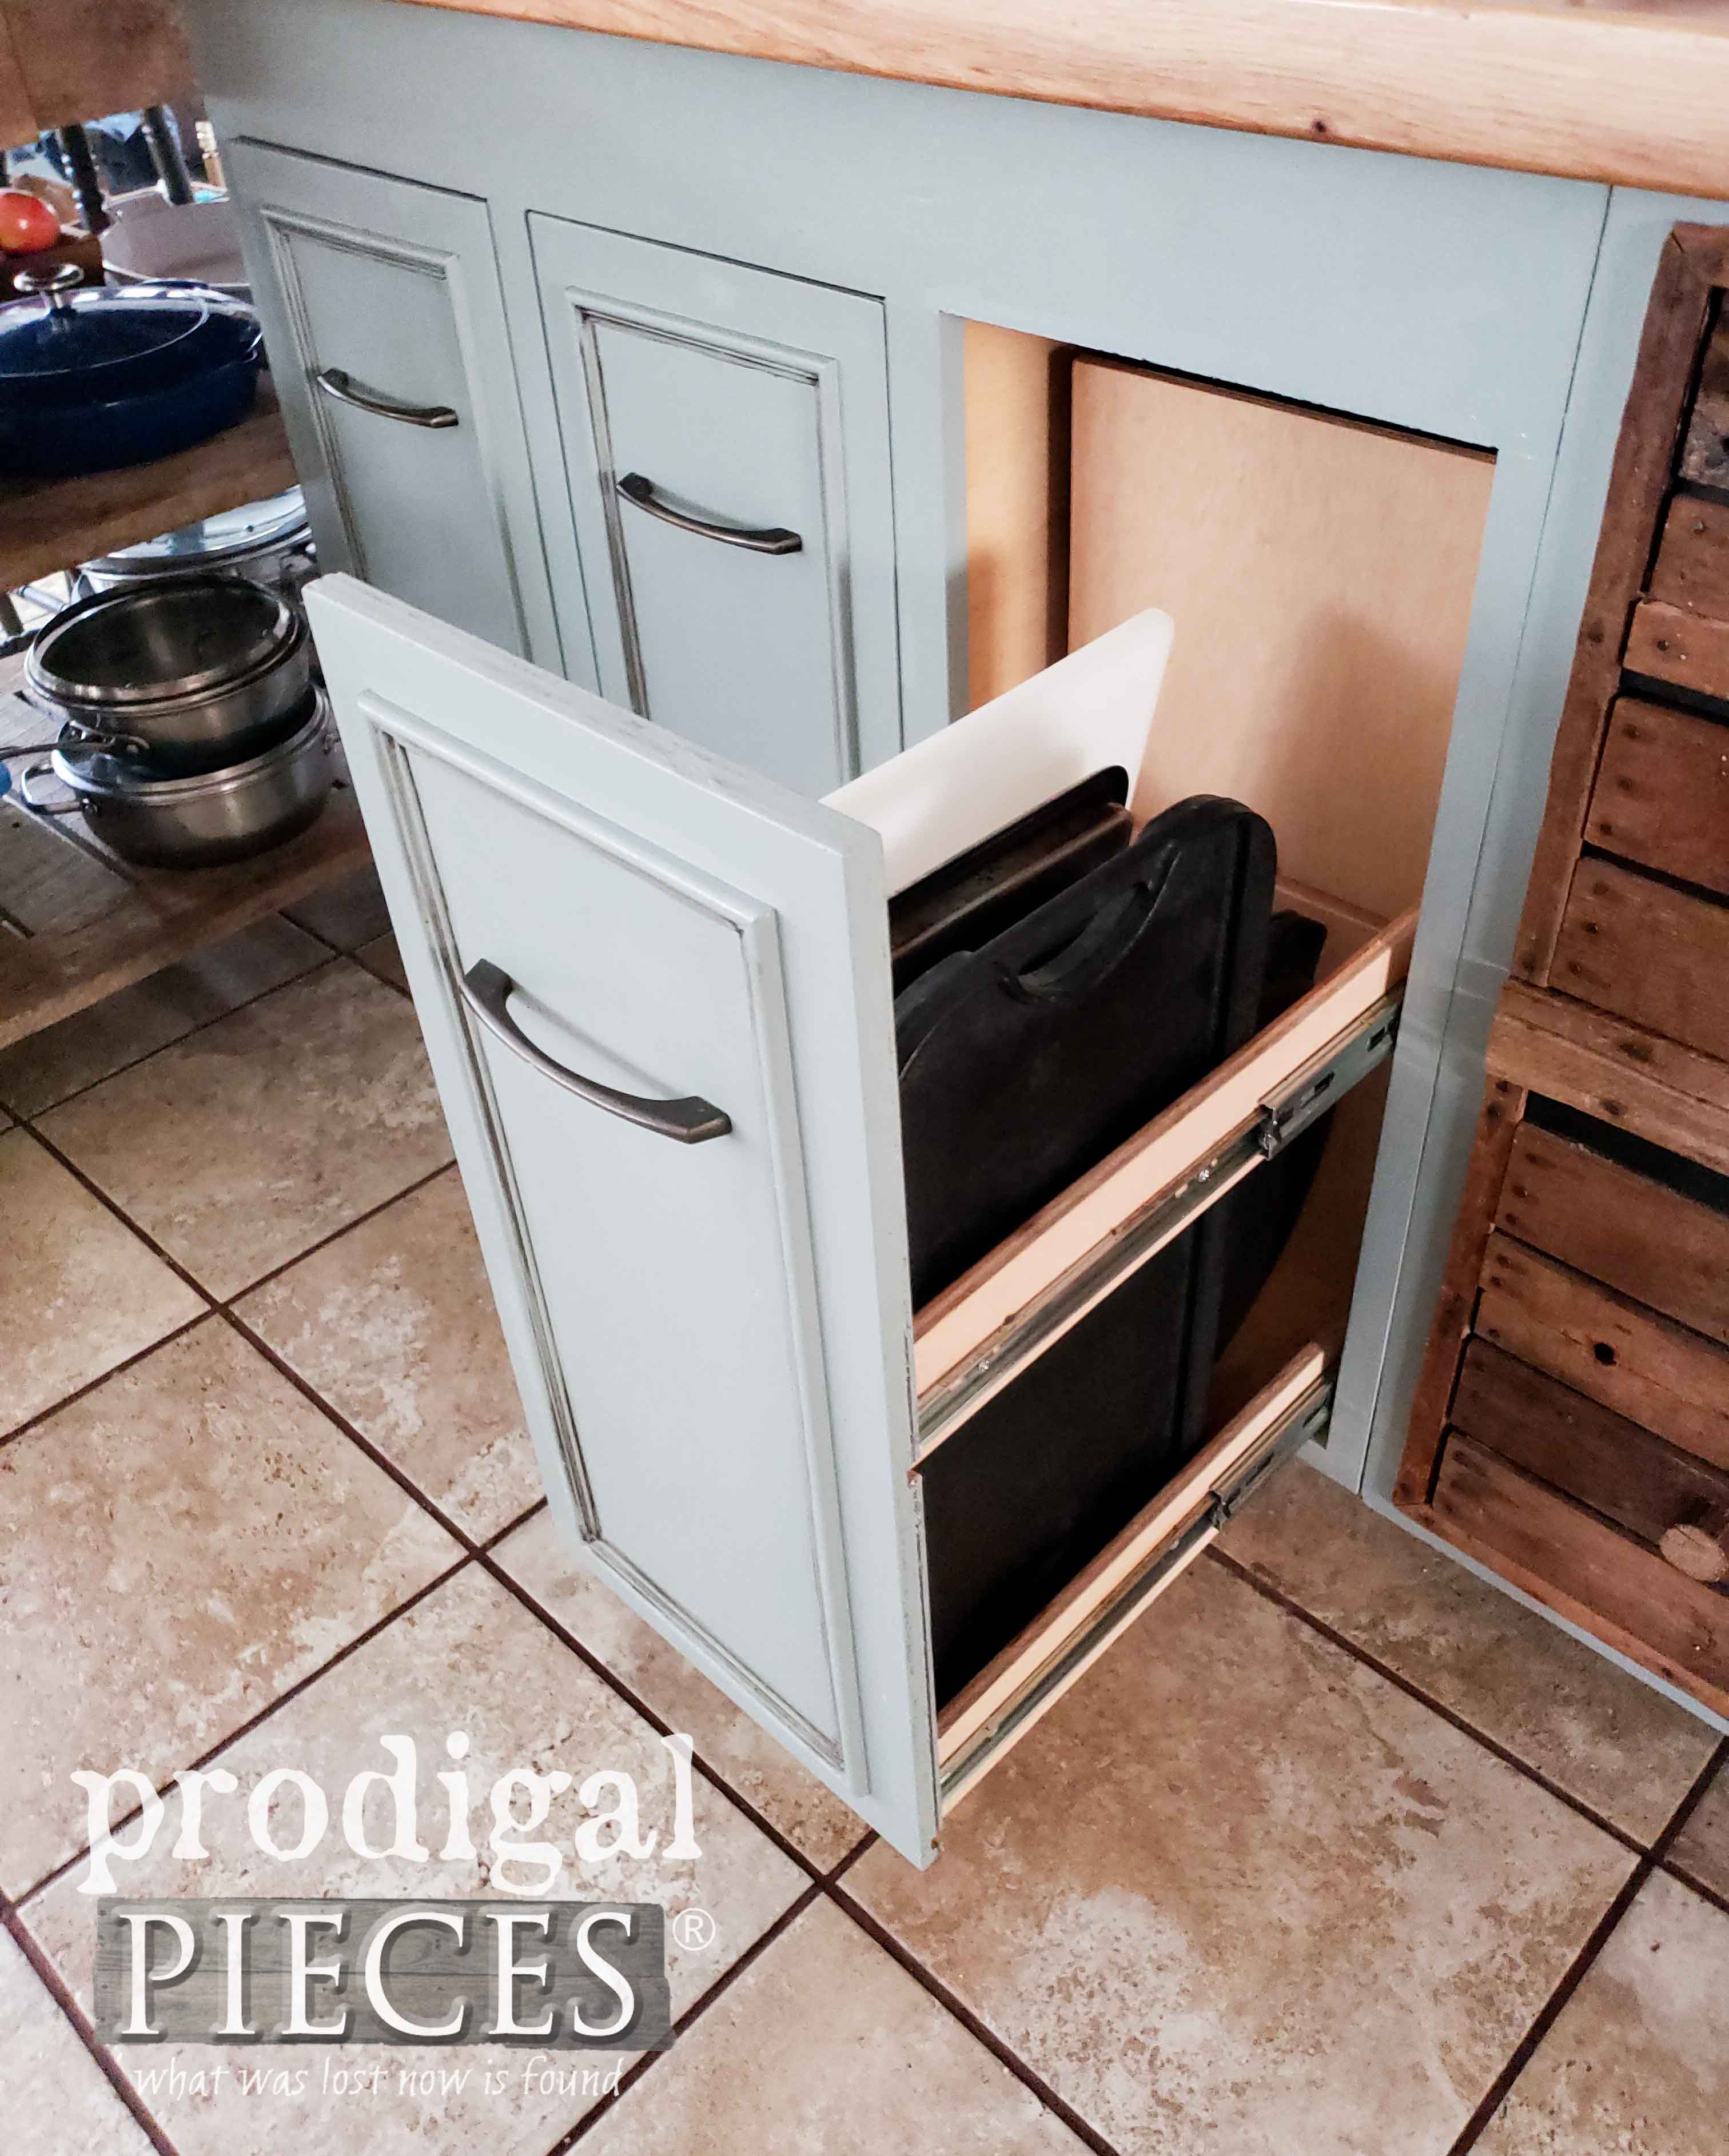 Custom Bakeware Drawer in Kitchen Cabinet for Bakeware and Cutting Boards by Prodigal Pieces | prodigalpieces.com